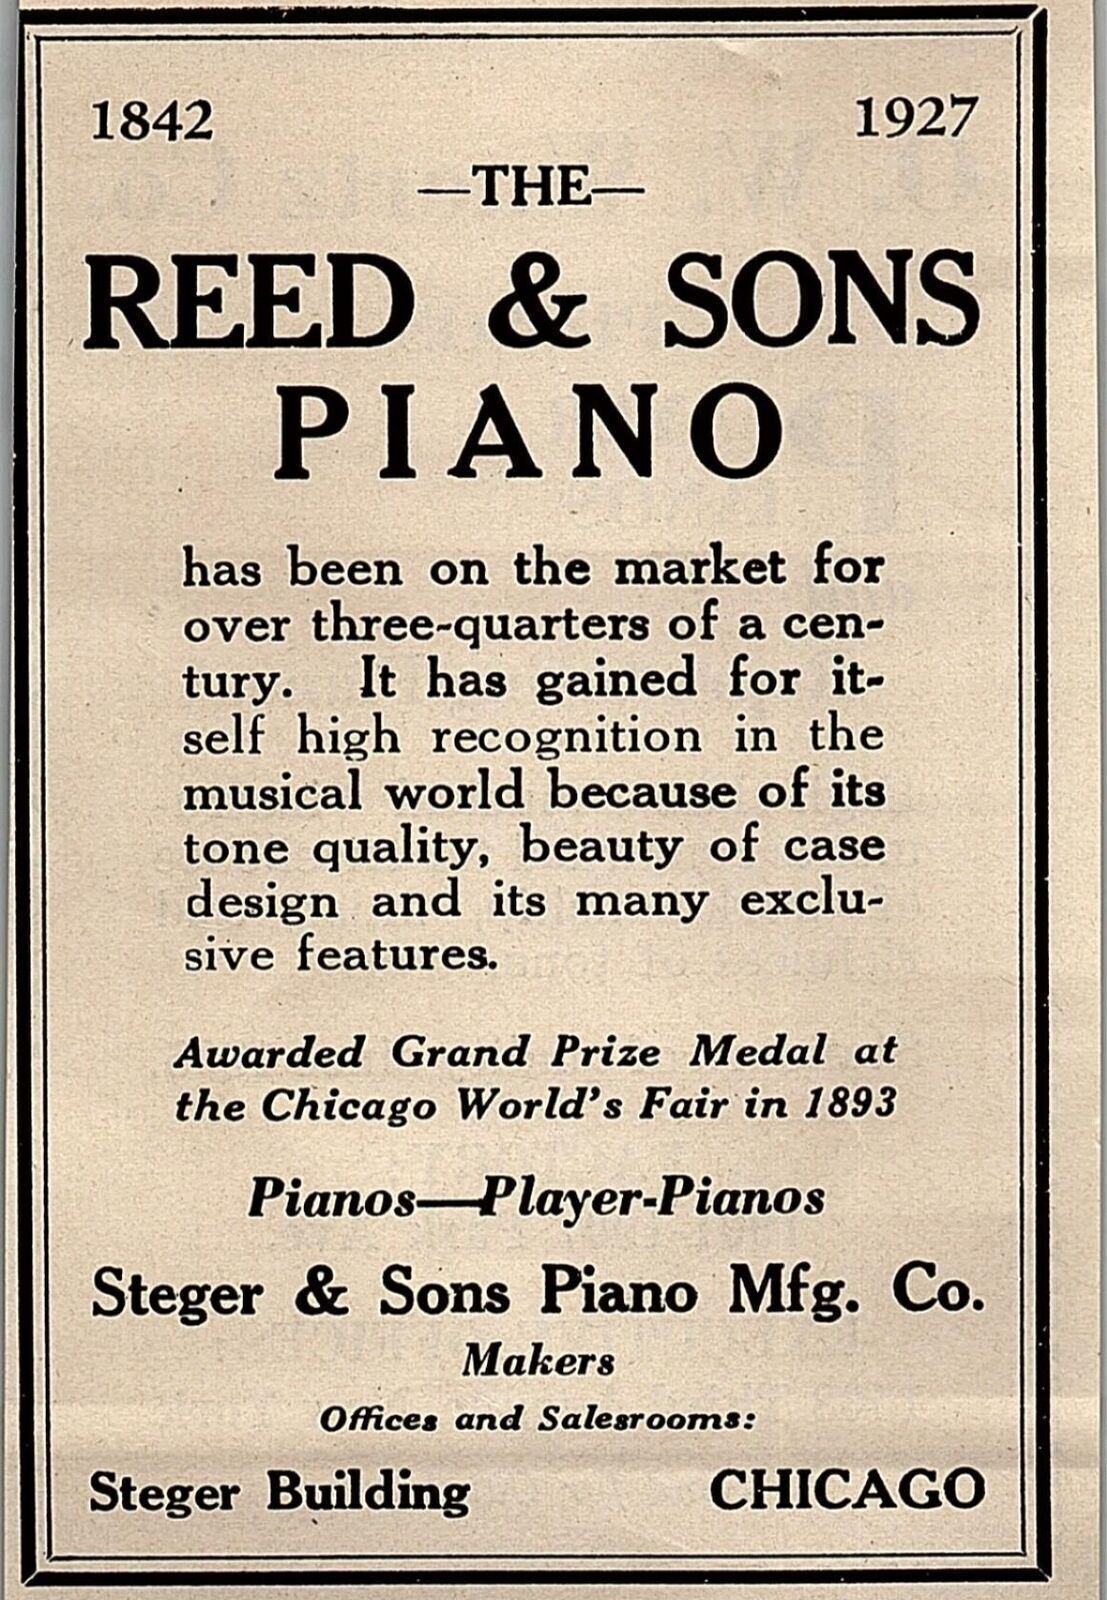 1927 REED & SONS PIANO STEGER & SONS CHICAGO ILLINOIS VINTAGE ADVERTISMENT 37-60